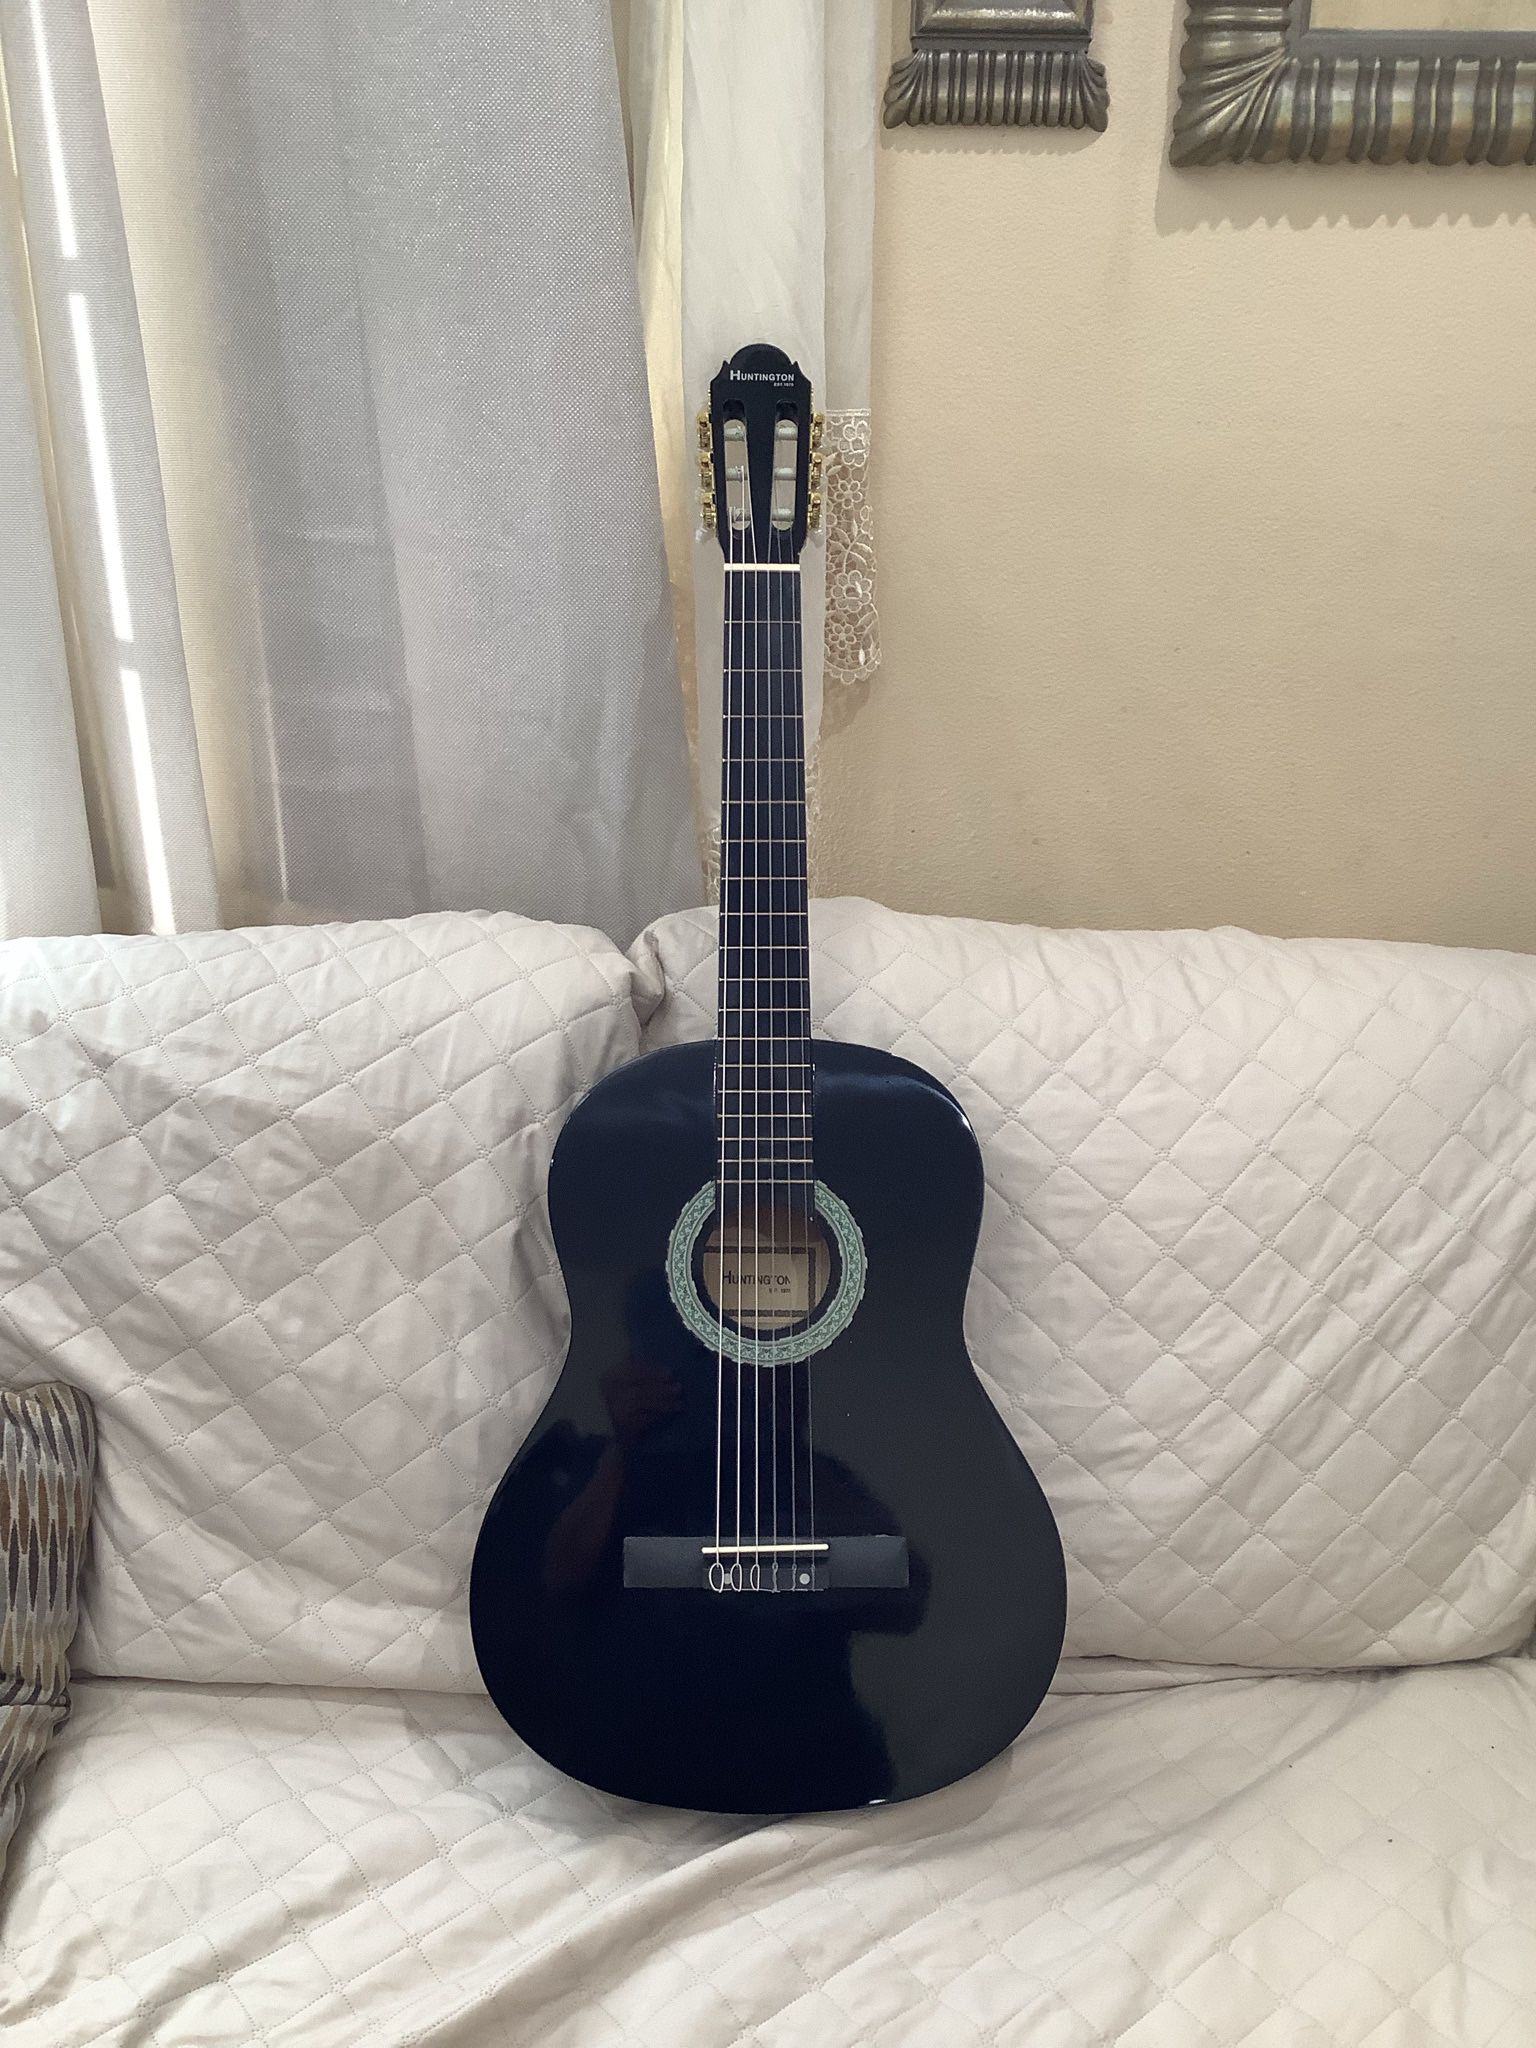 Huntington Classic Acoustic Guitar (Special Price)